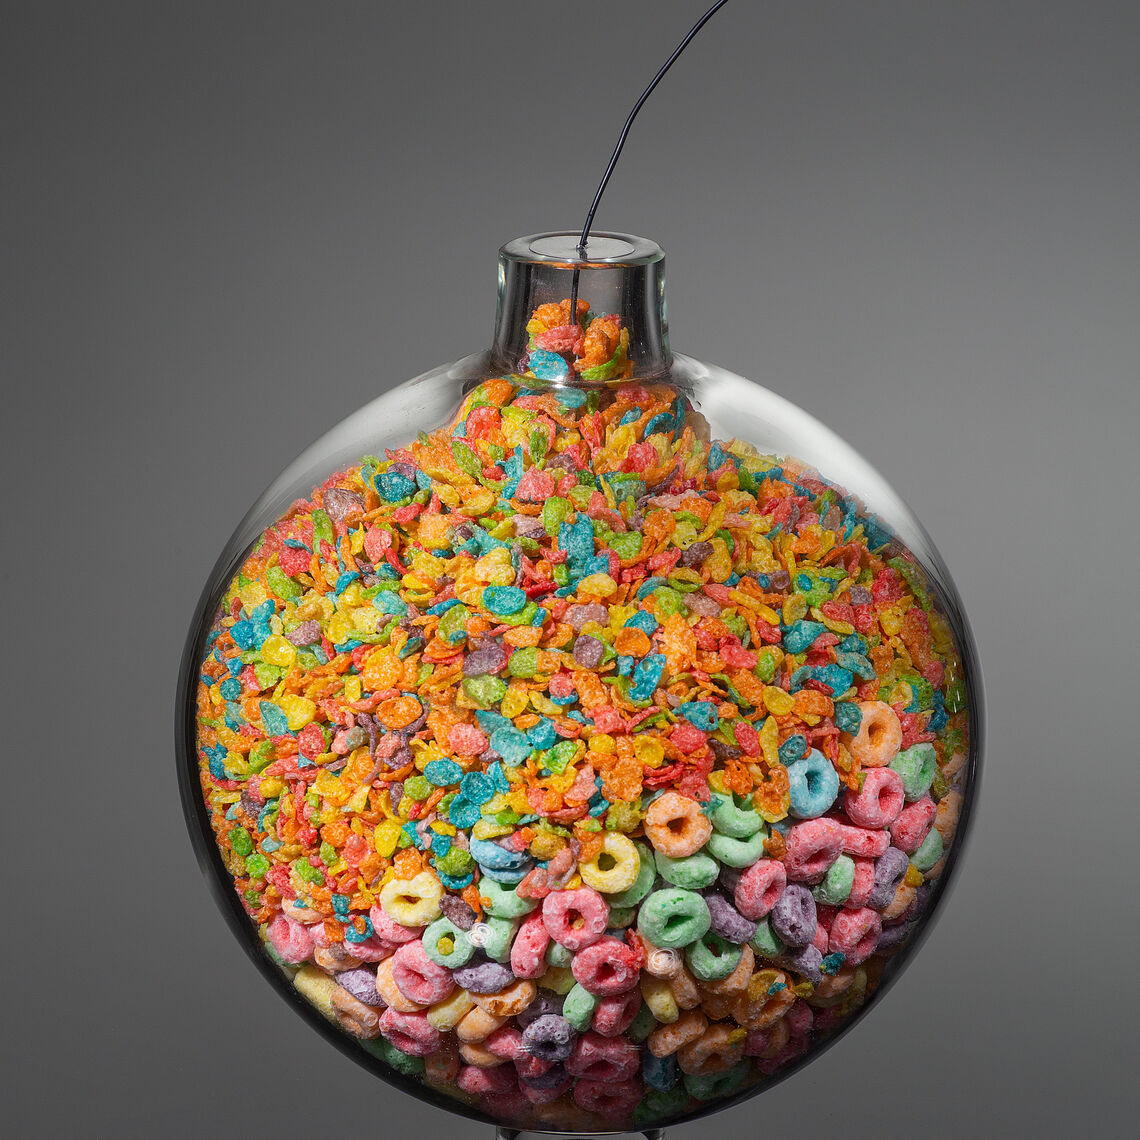 Froot Loops and Pebbles, 2019. Glass, candy, and string